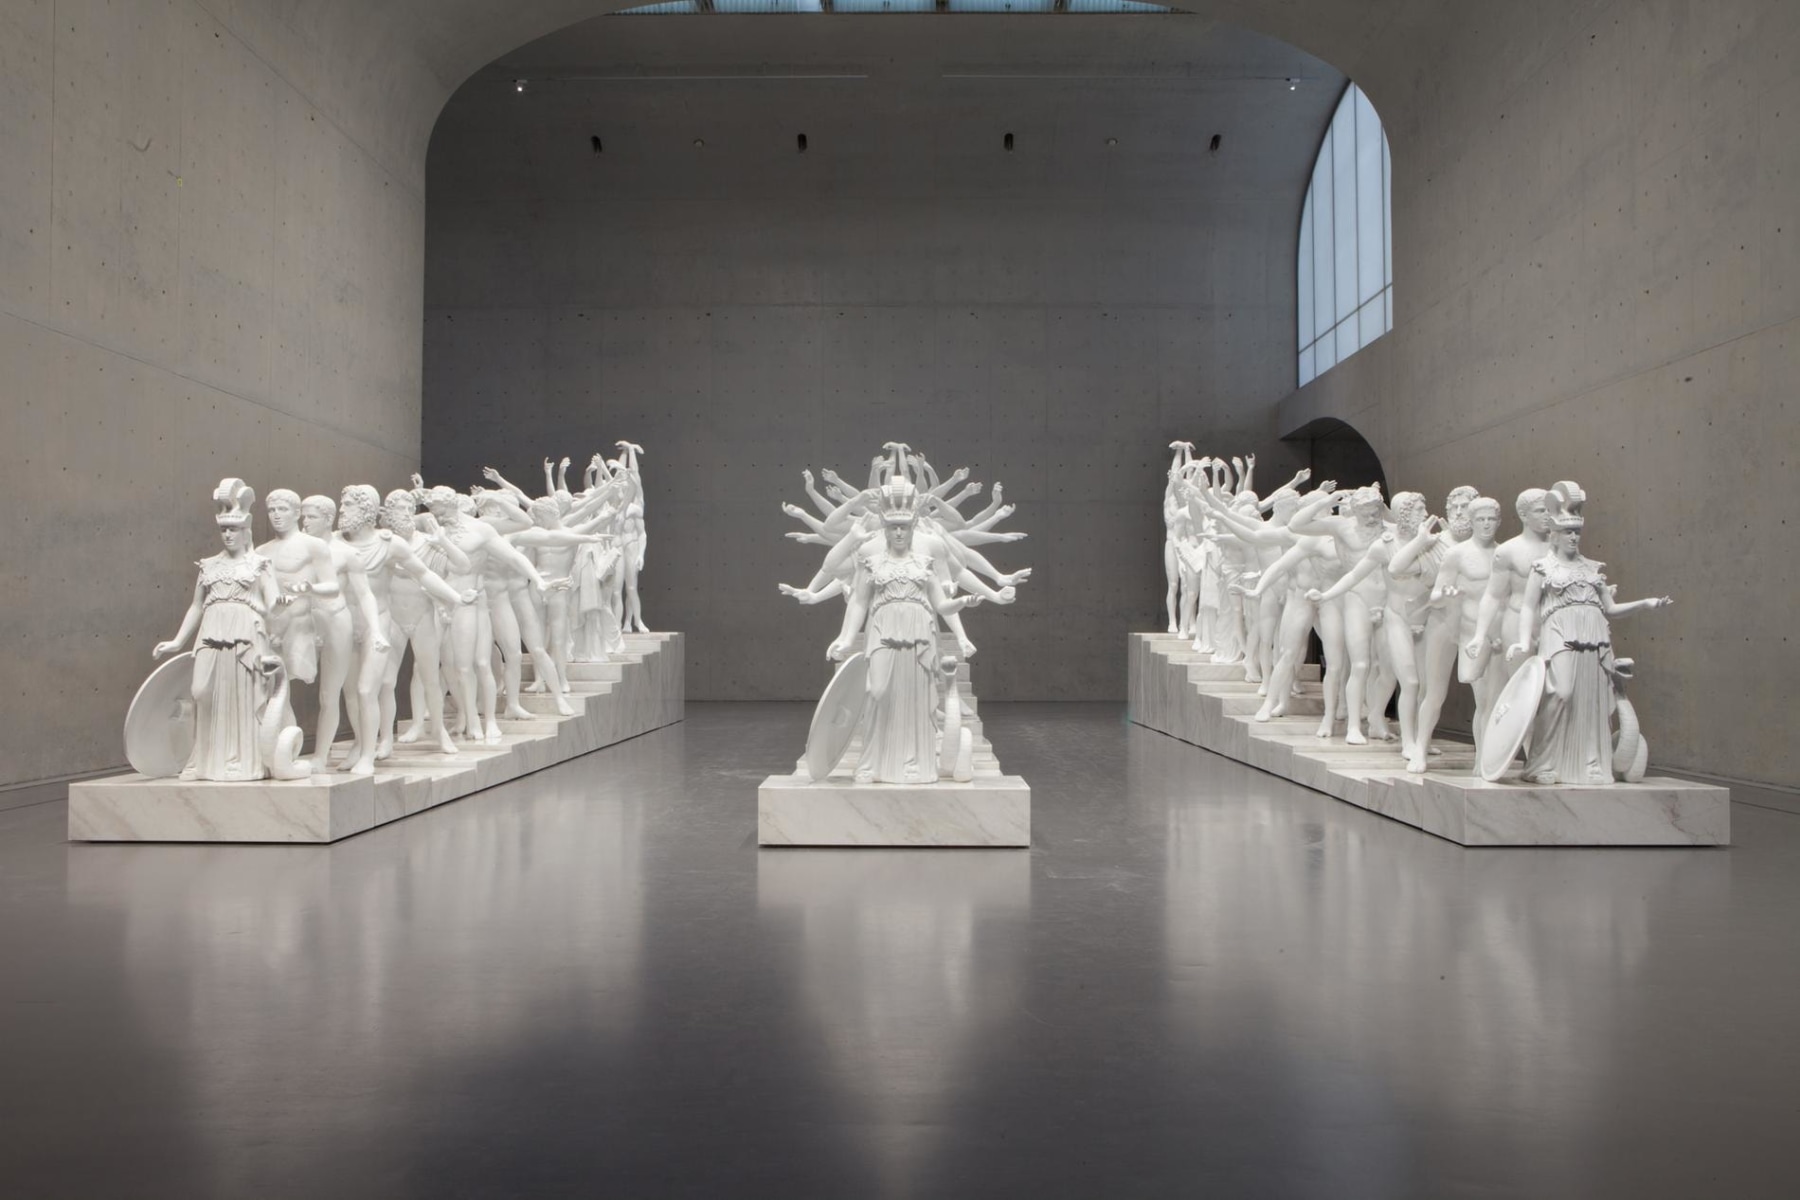 A series of 19 white casts of classical statuary, in three rows, within a large grey room